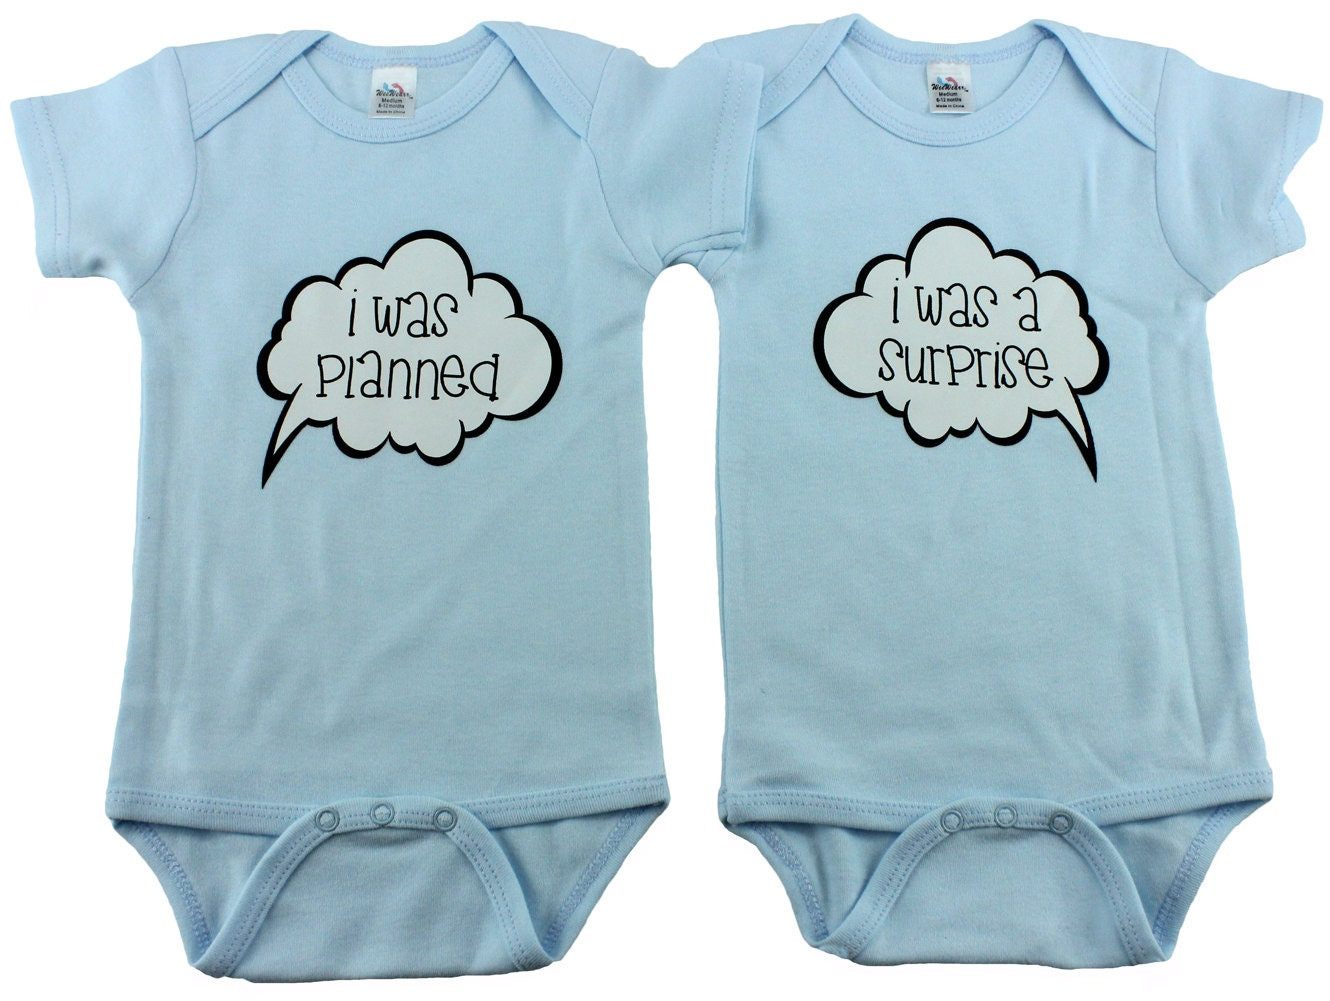 Gift Ideas For Twin Boys
 Twin Boy Baby Gifts I was planned I was a surprise